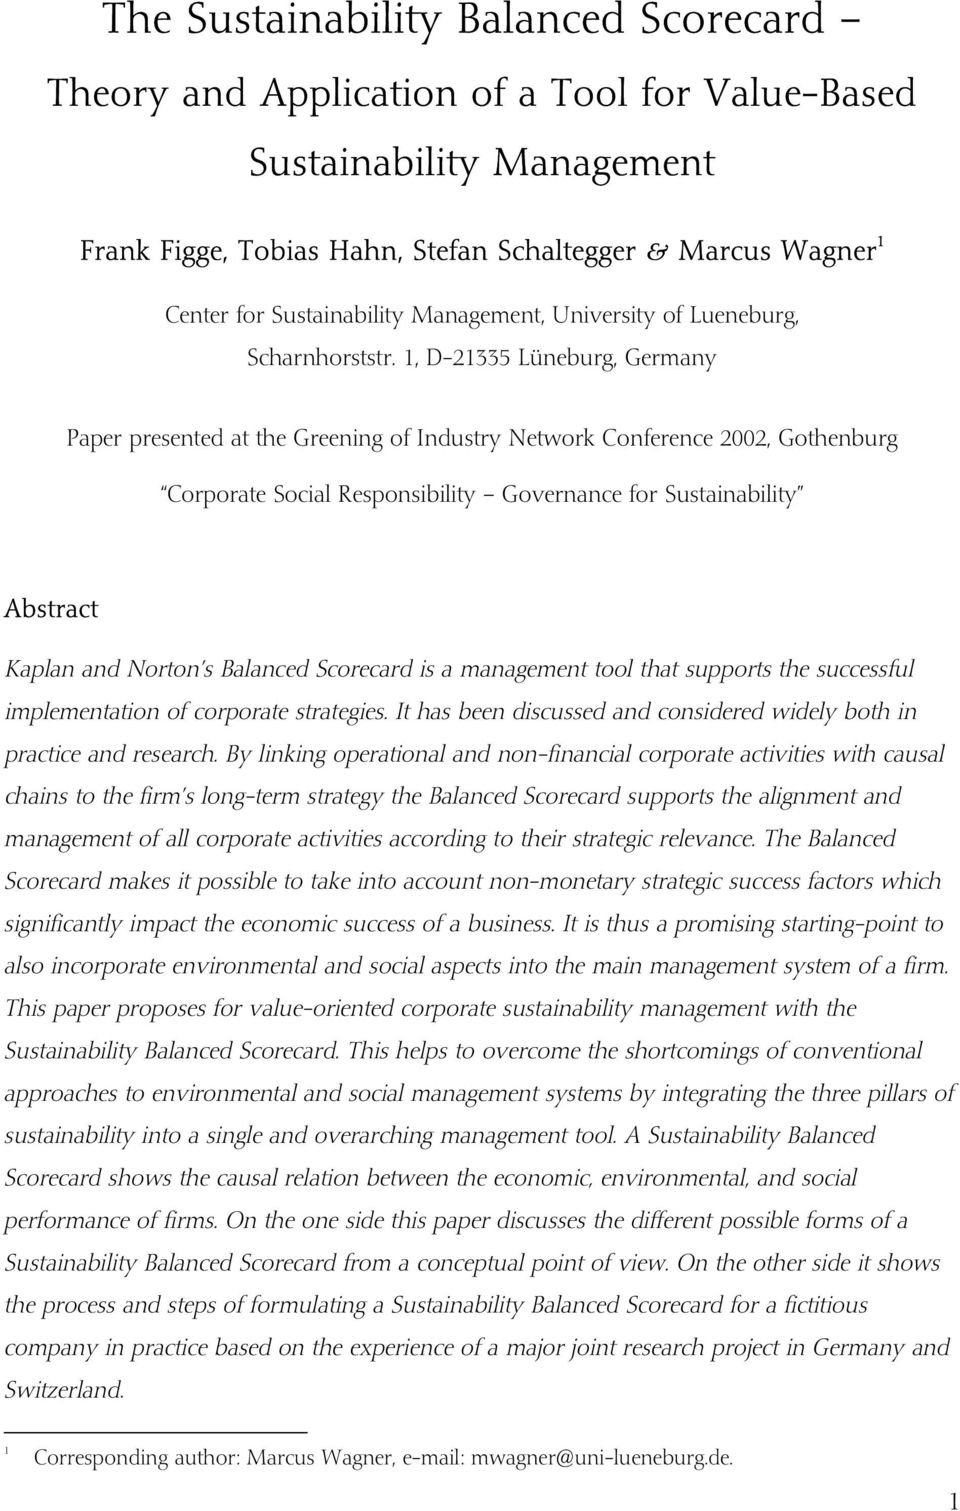 1, D-21335 Lüneburg, Germany Paper presented at the Greening of Industry Network Conference 2002, Gothenburg Corporate Social Responsibility Governance for Sustainability Abstract Kaplan and Norton s